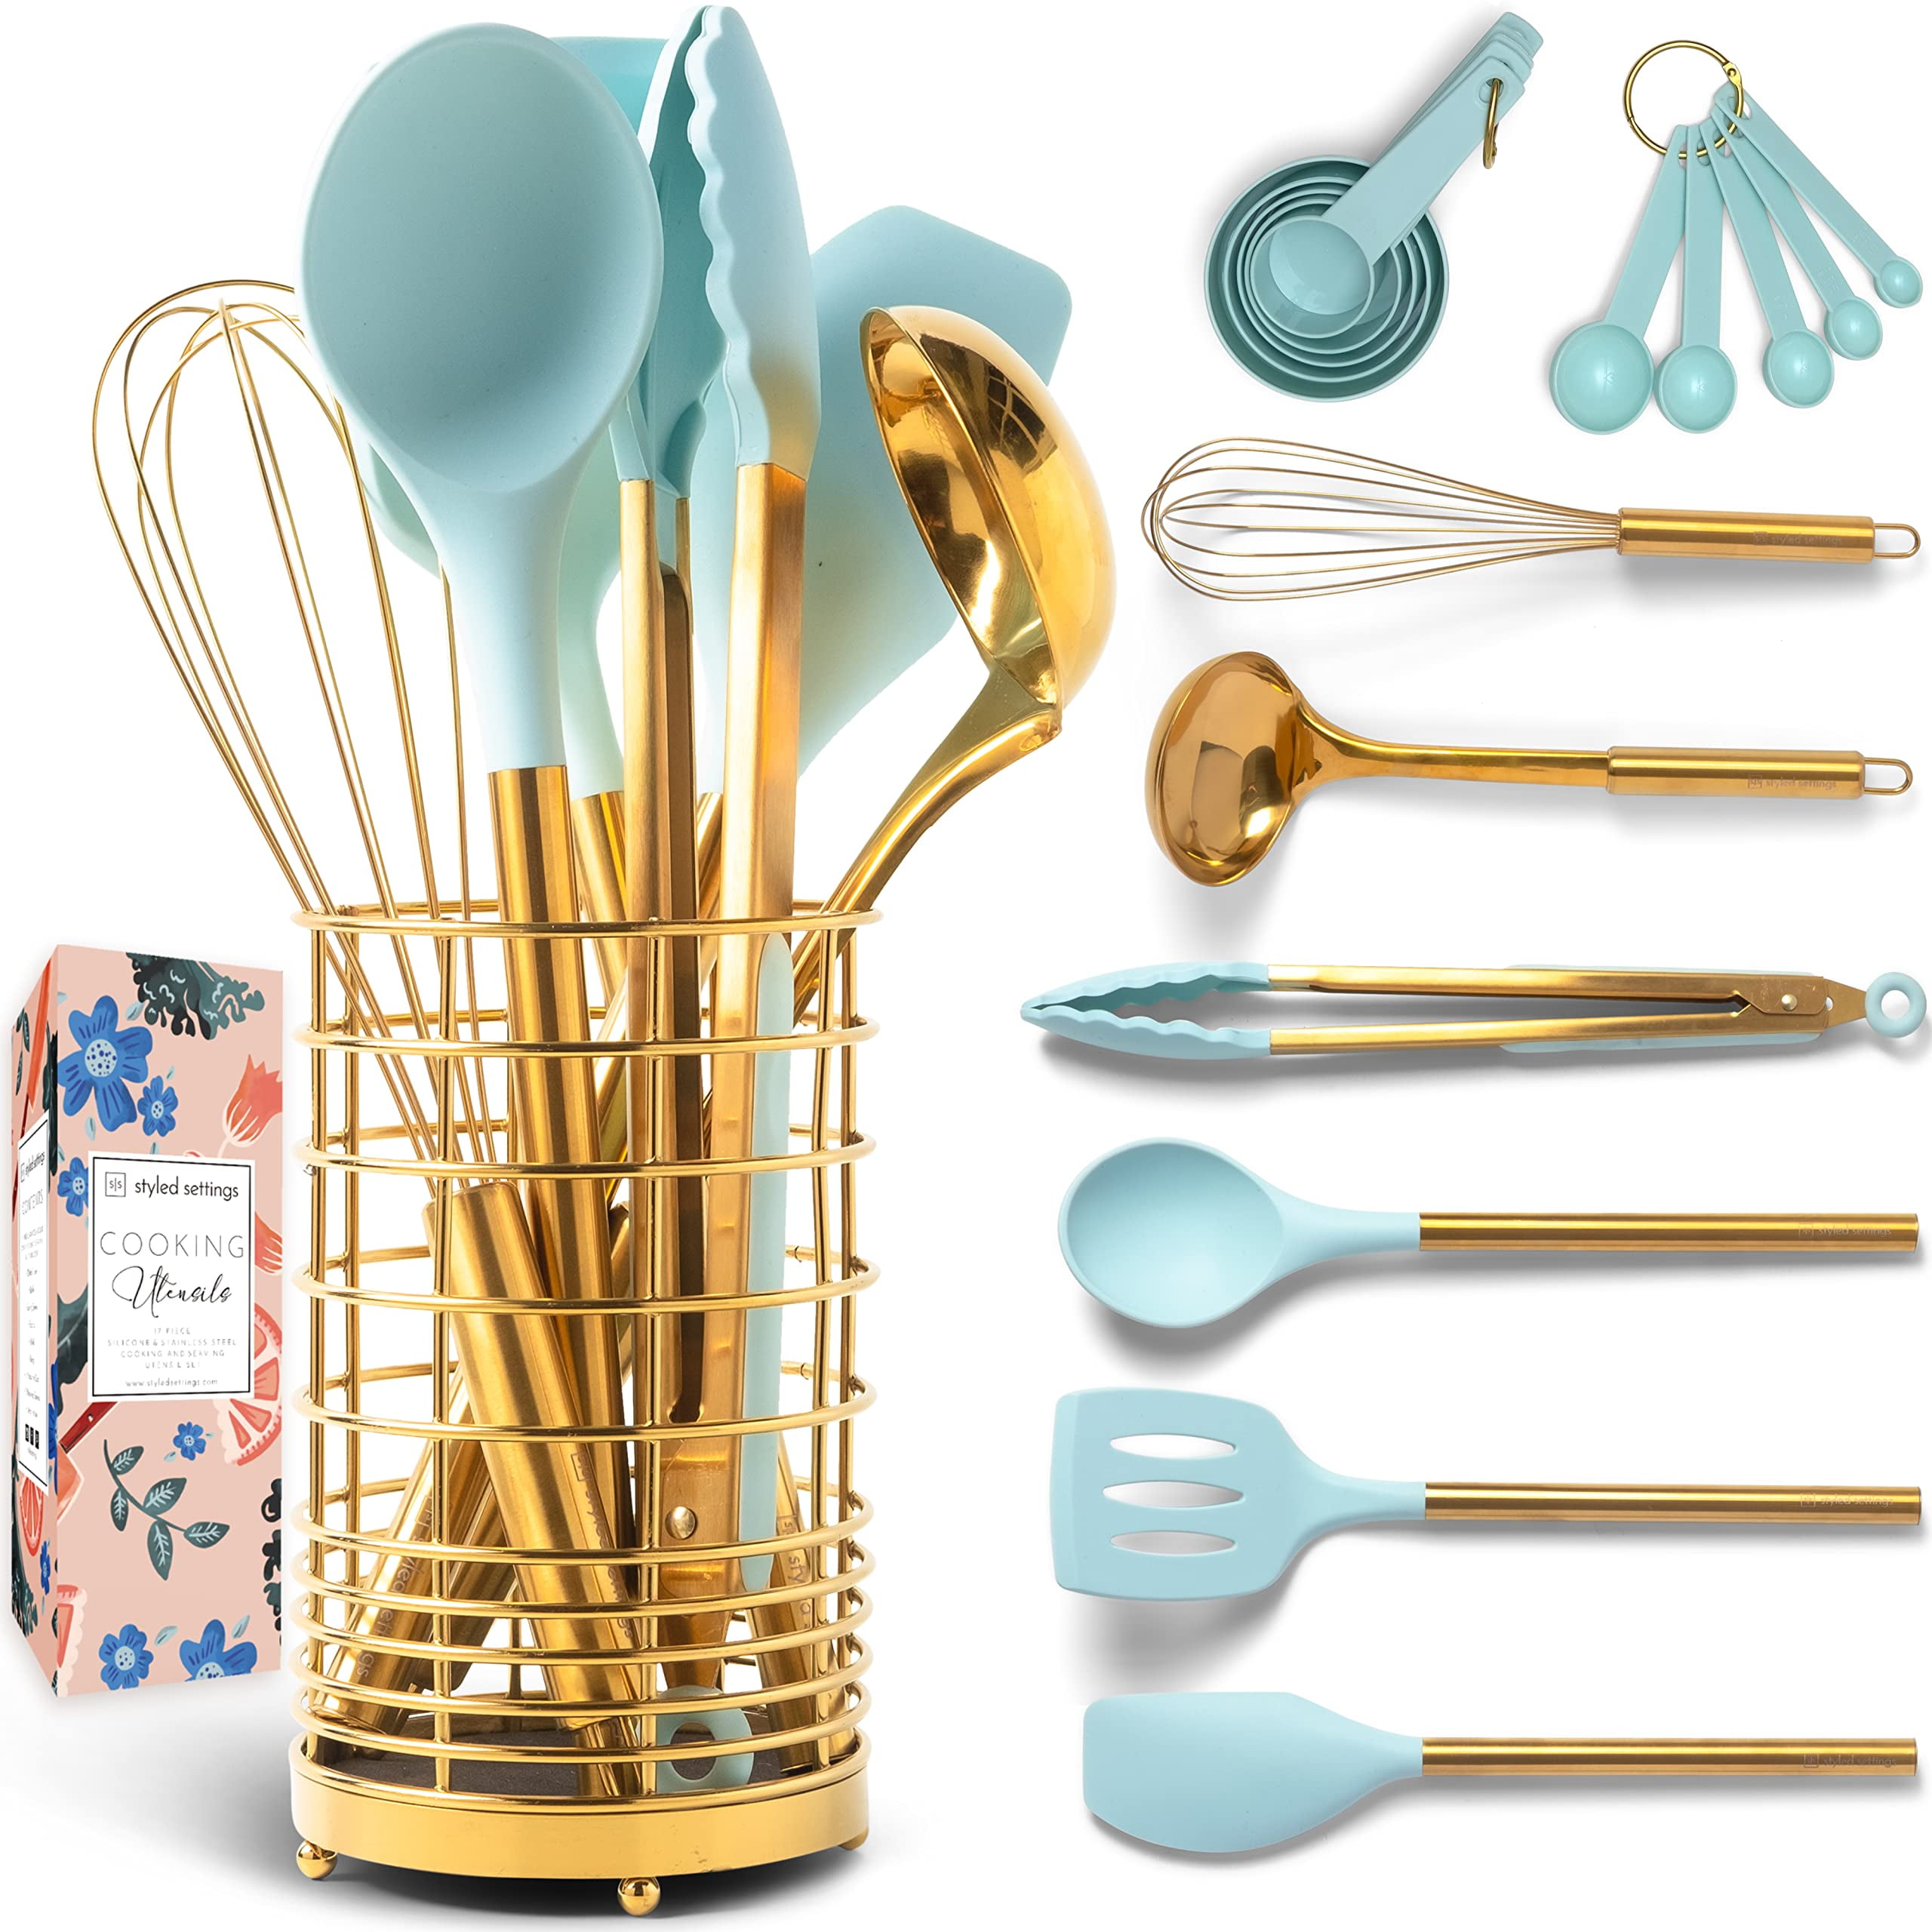 Styled Settings Gold & Navy Blue Silicone Kitchen Utensils Set with Holder